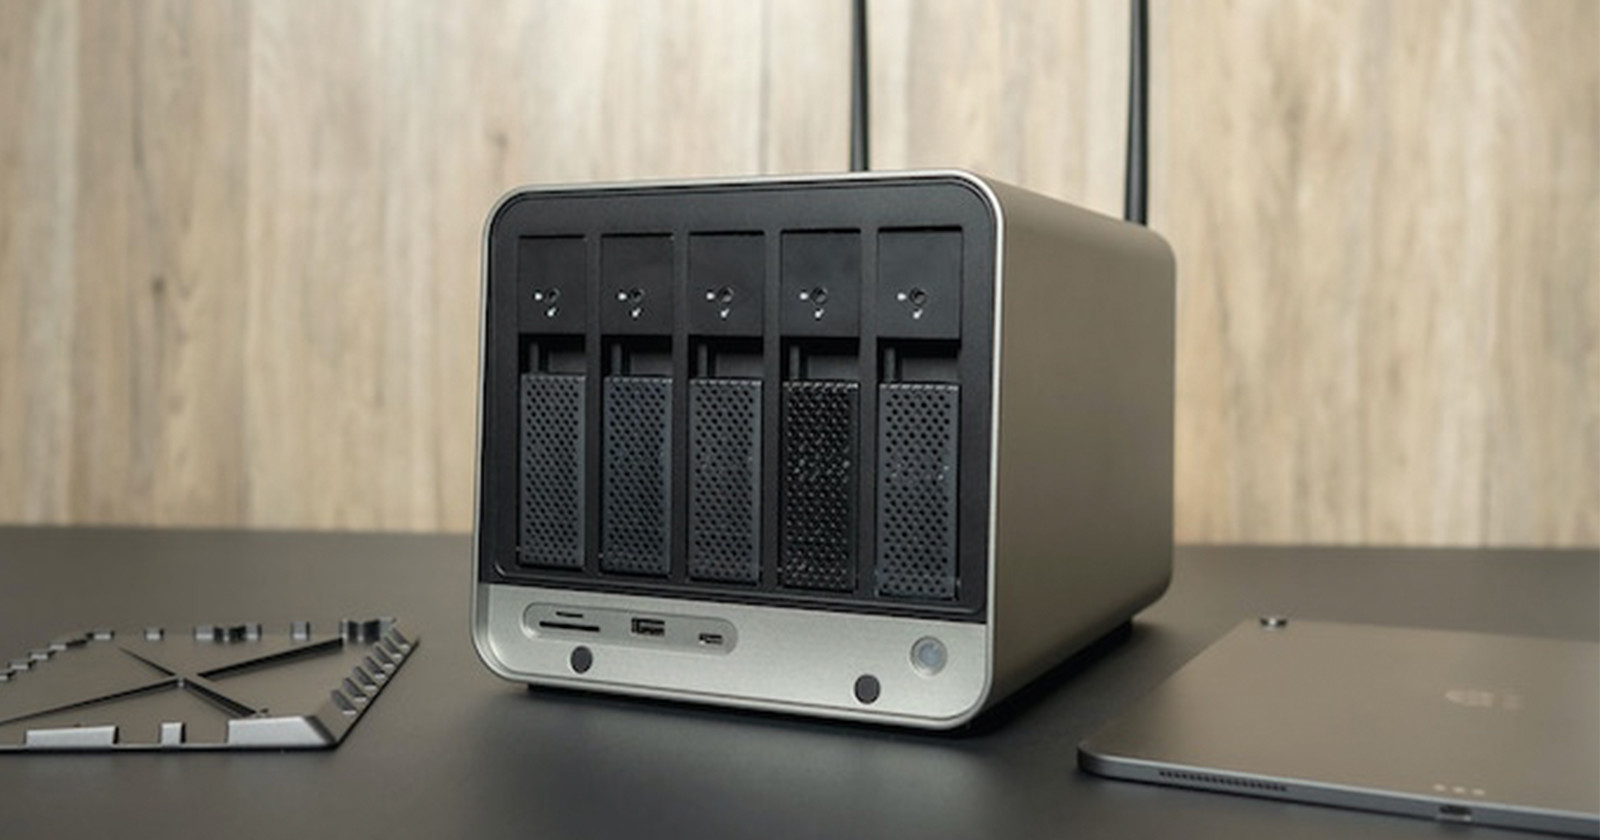 Storaxa is a Customizable Remote NAS and Home Cloud Storage System